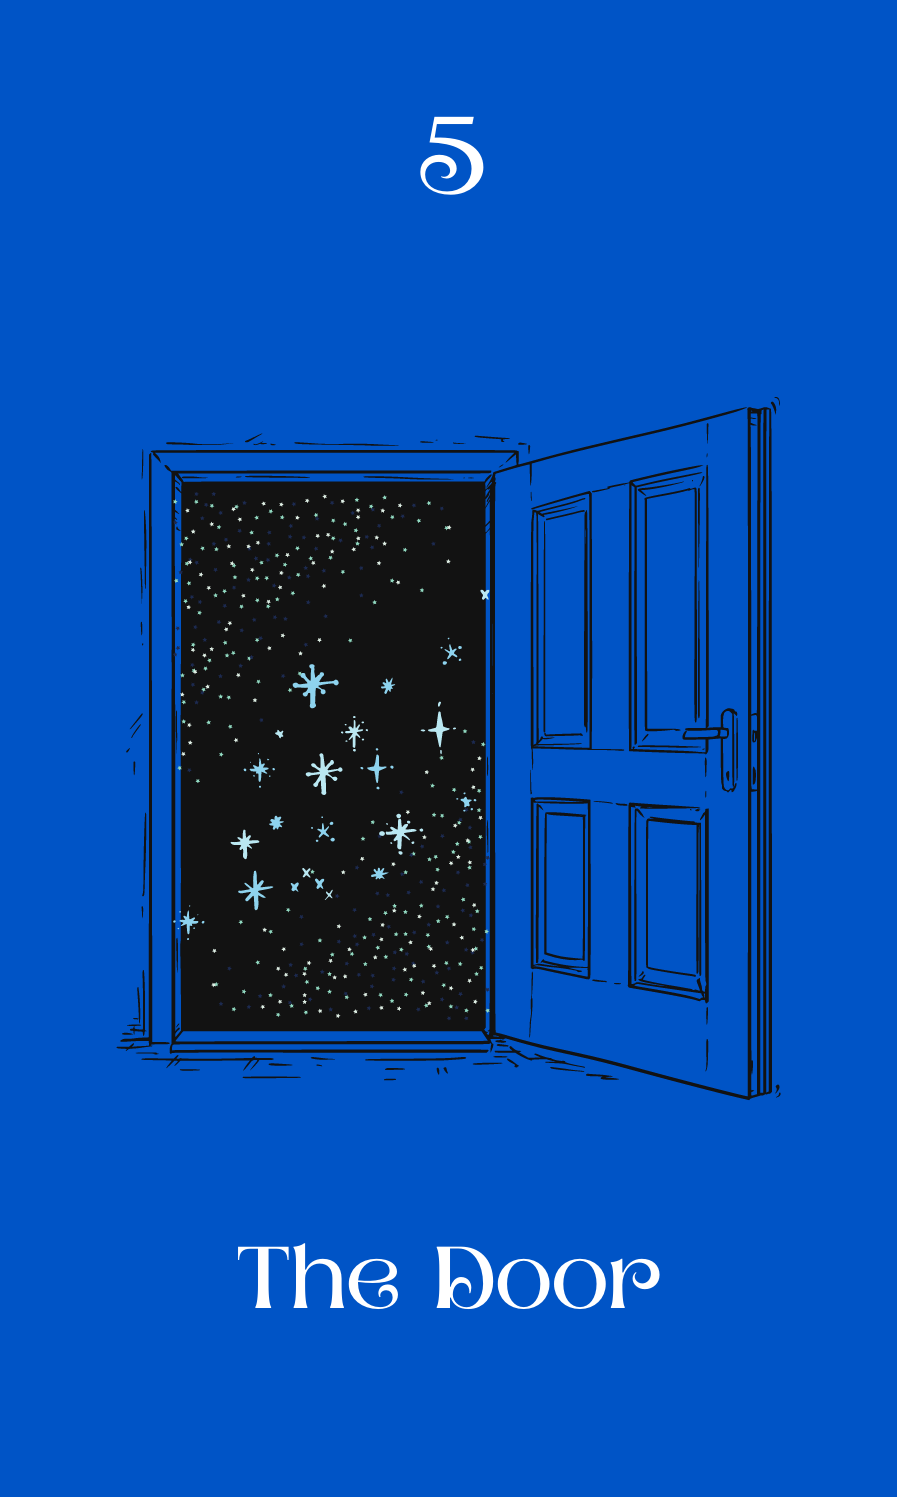 An image of an open door with stars on the other side